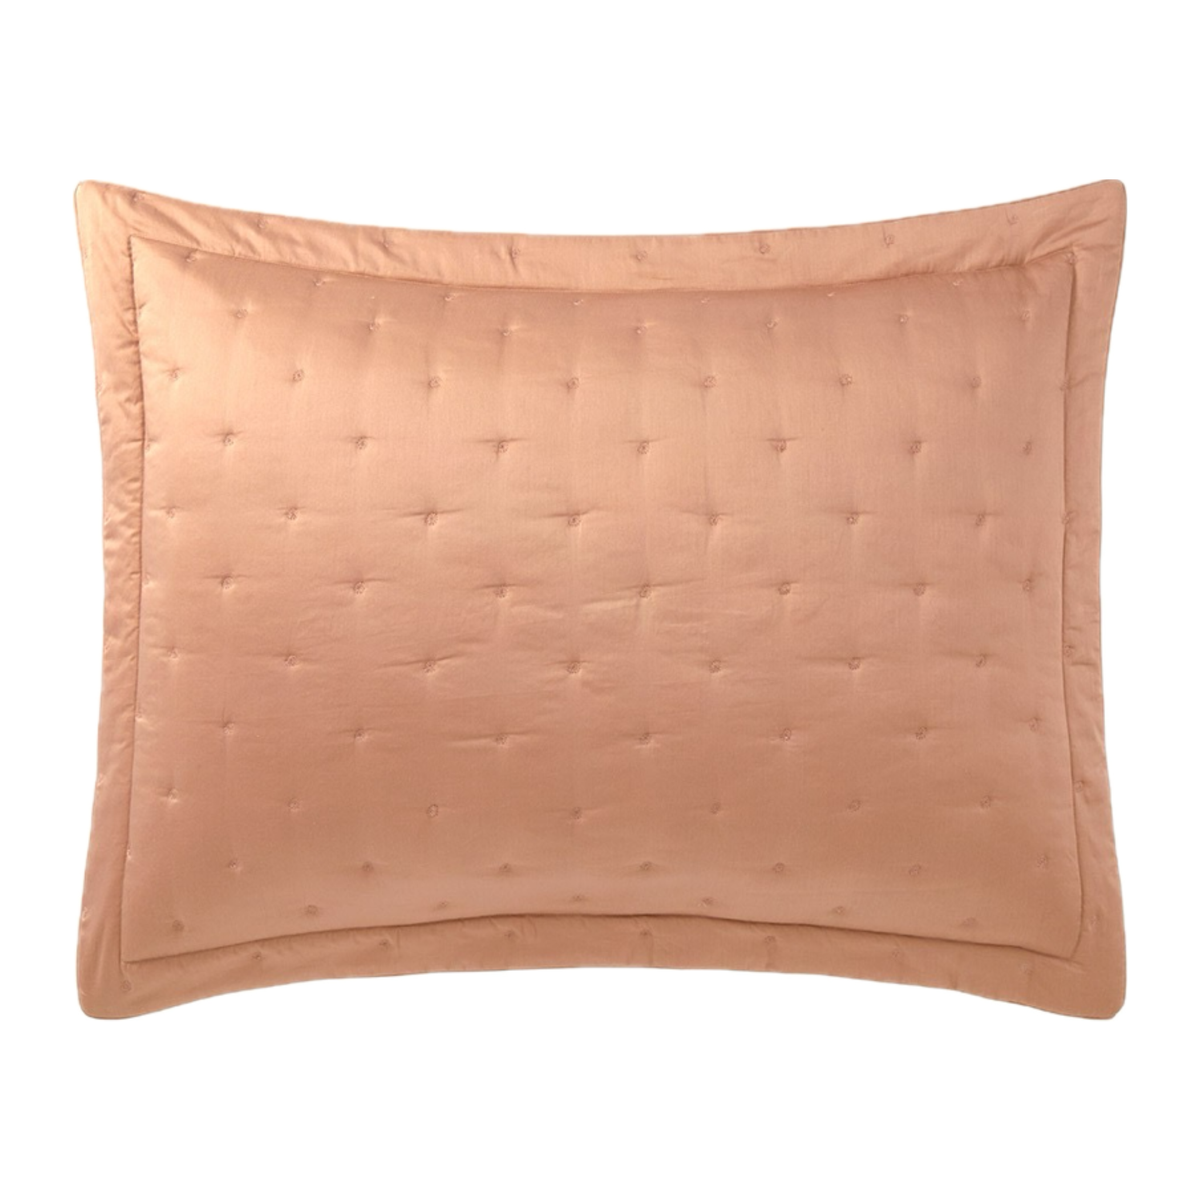 Sham of Yves Delorme Quilted Triomphe Bedding in Sienna Color